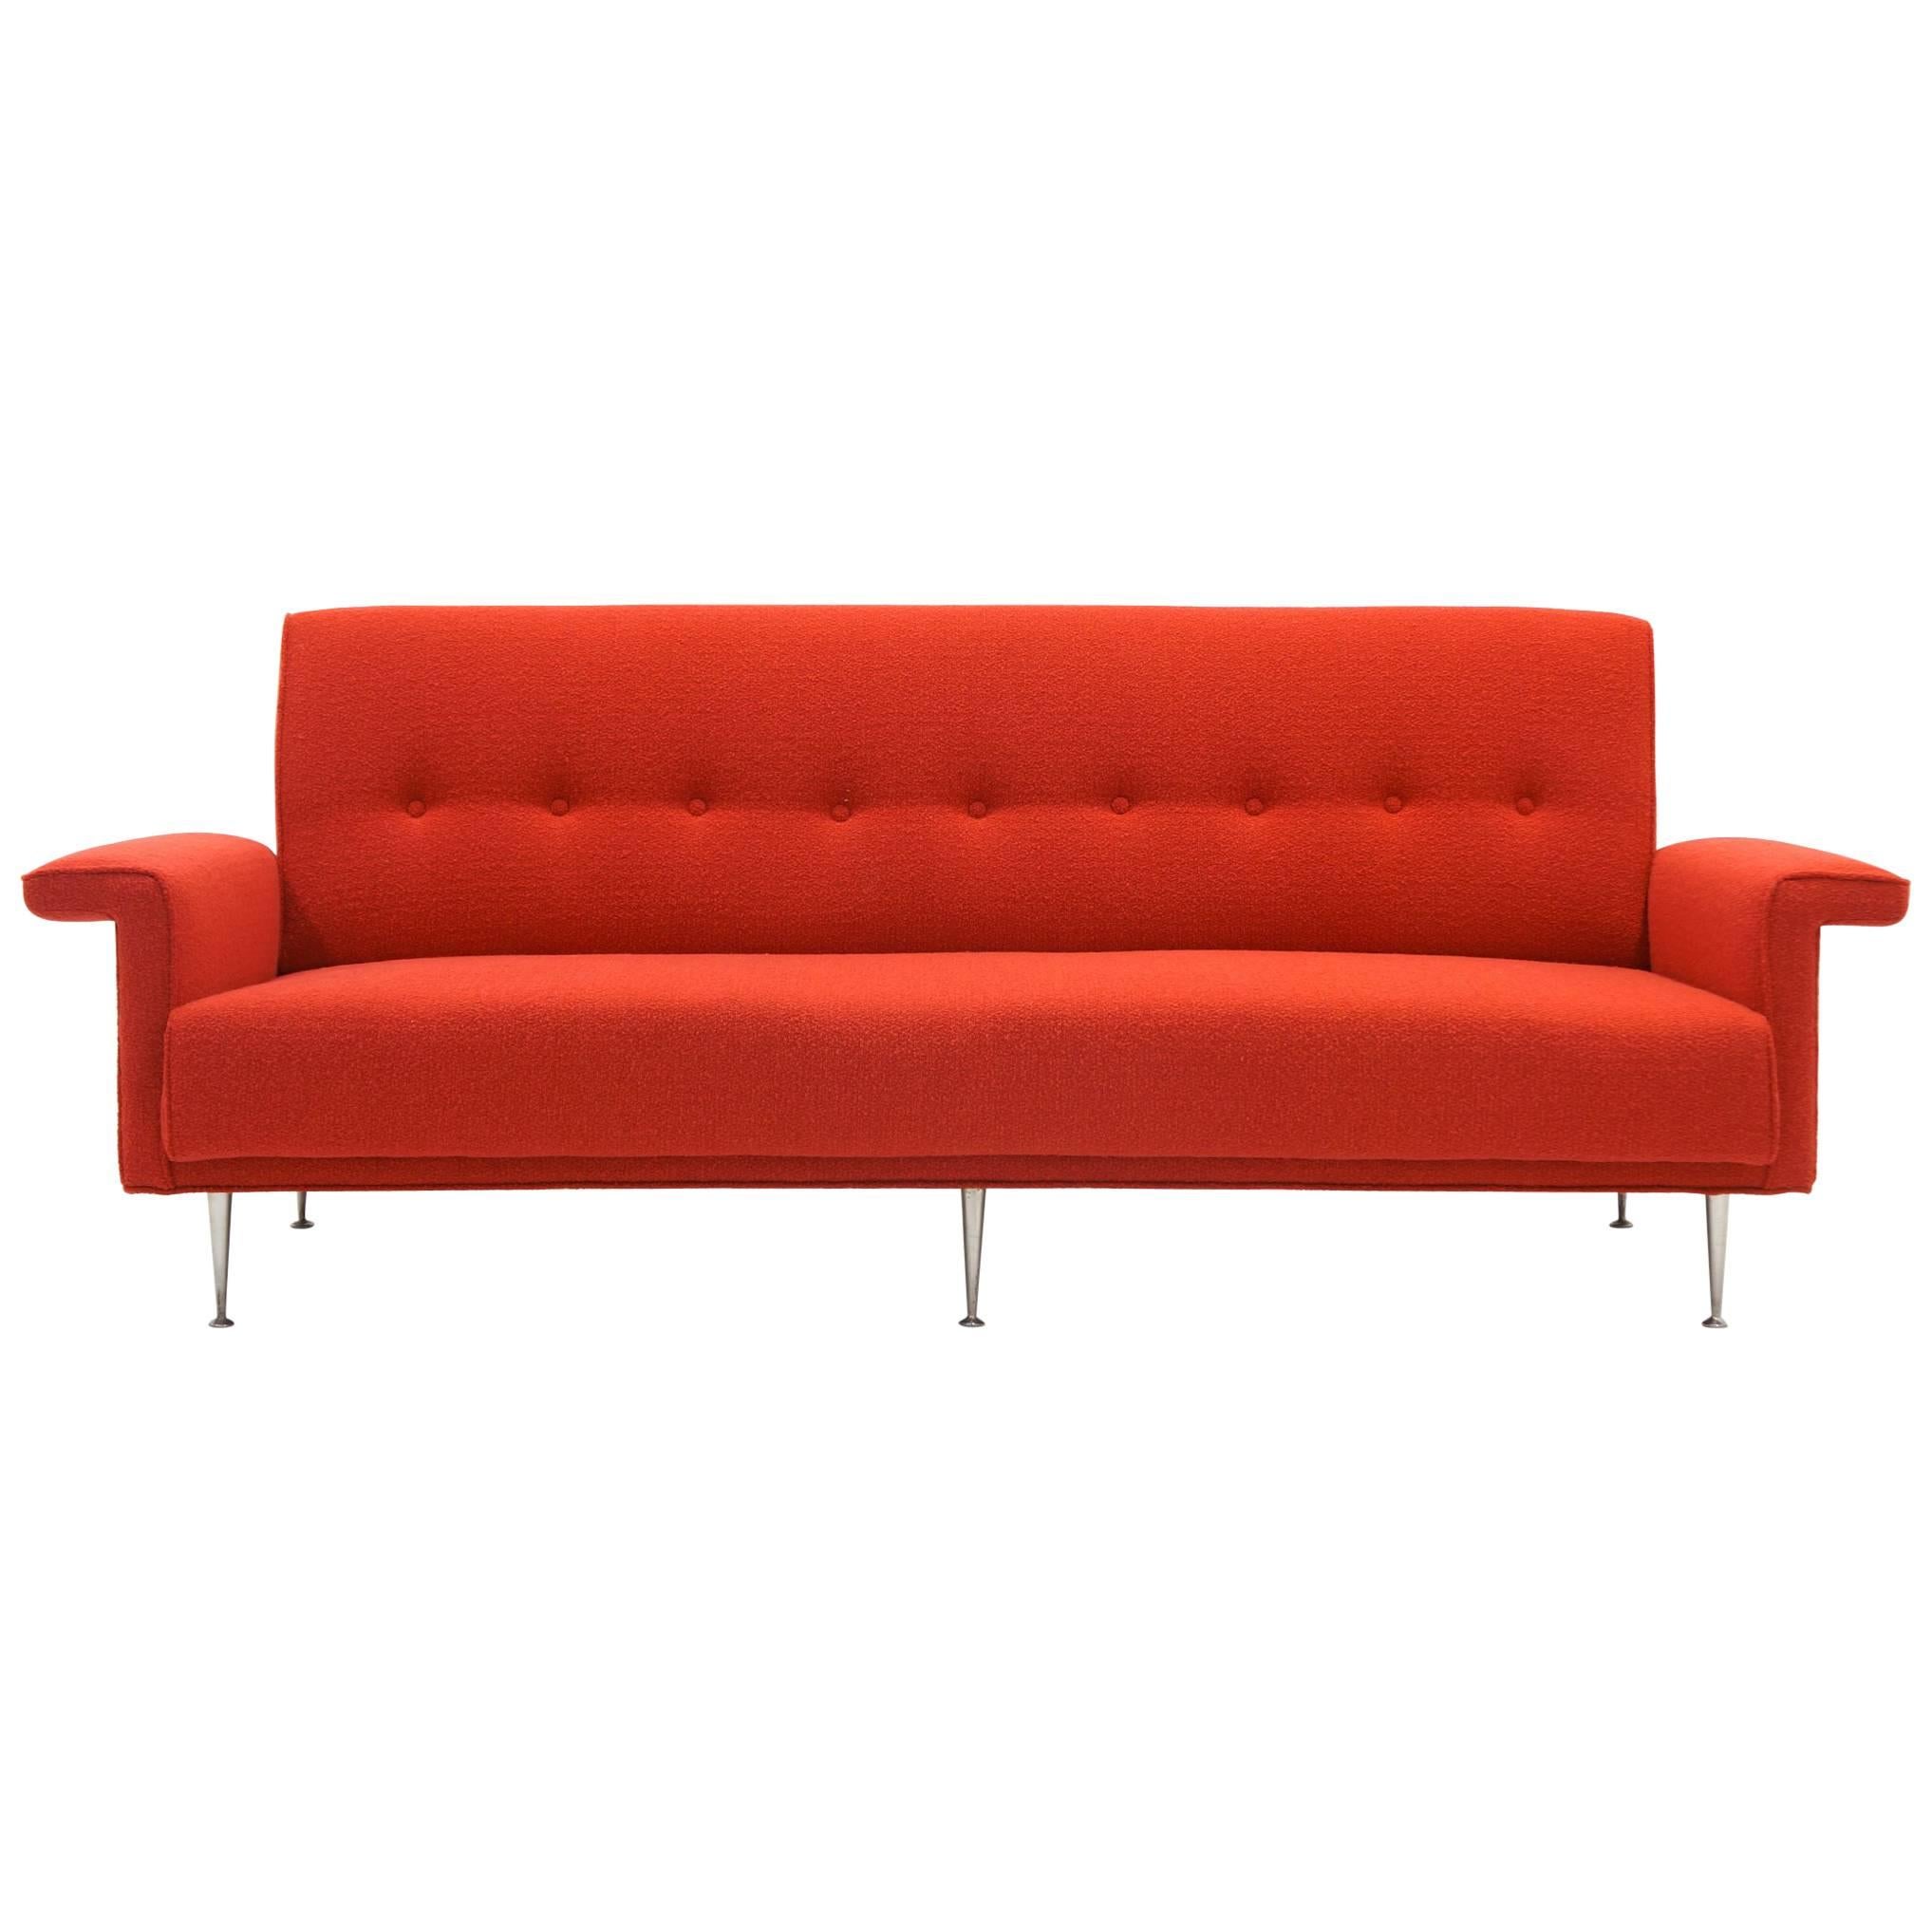 George Nelson for Herman Miller Thin Edge Sofa No. 5483